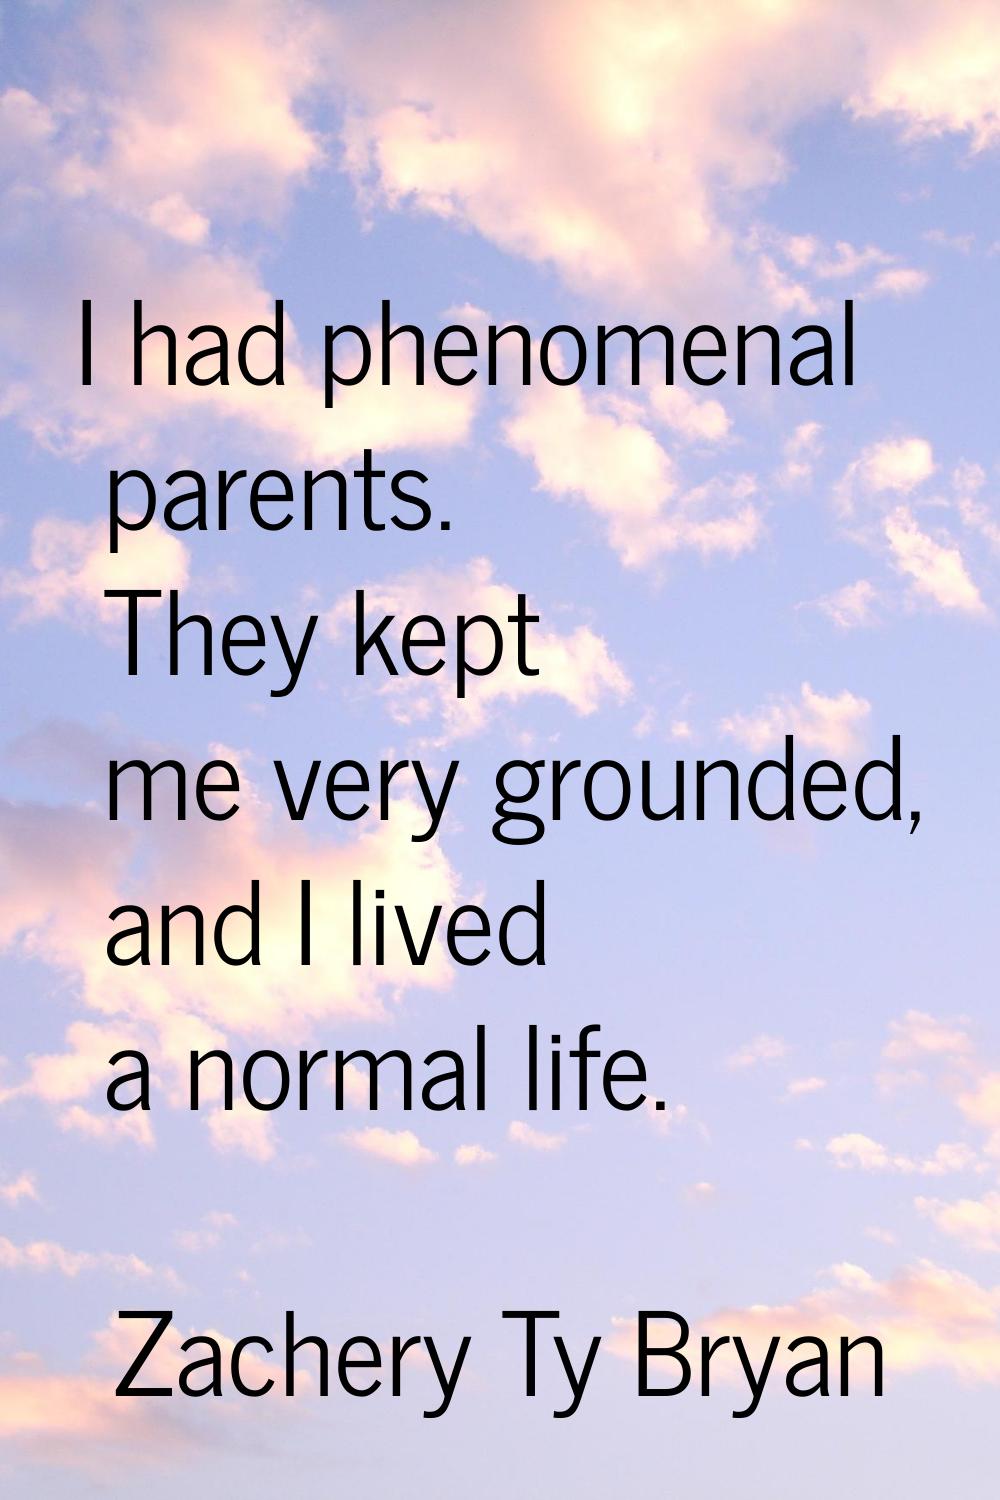 I had phenomenal parents. They kept me very grounded, and I lived a normal life.